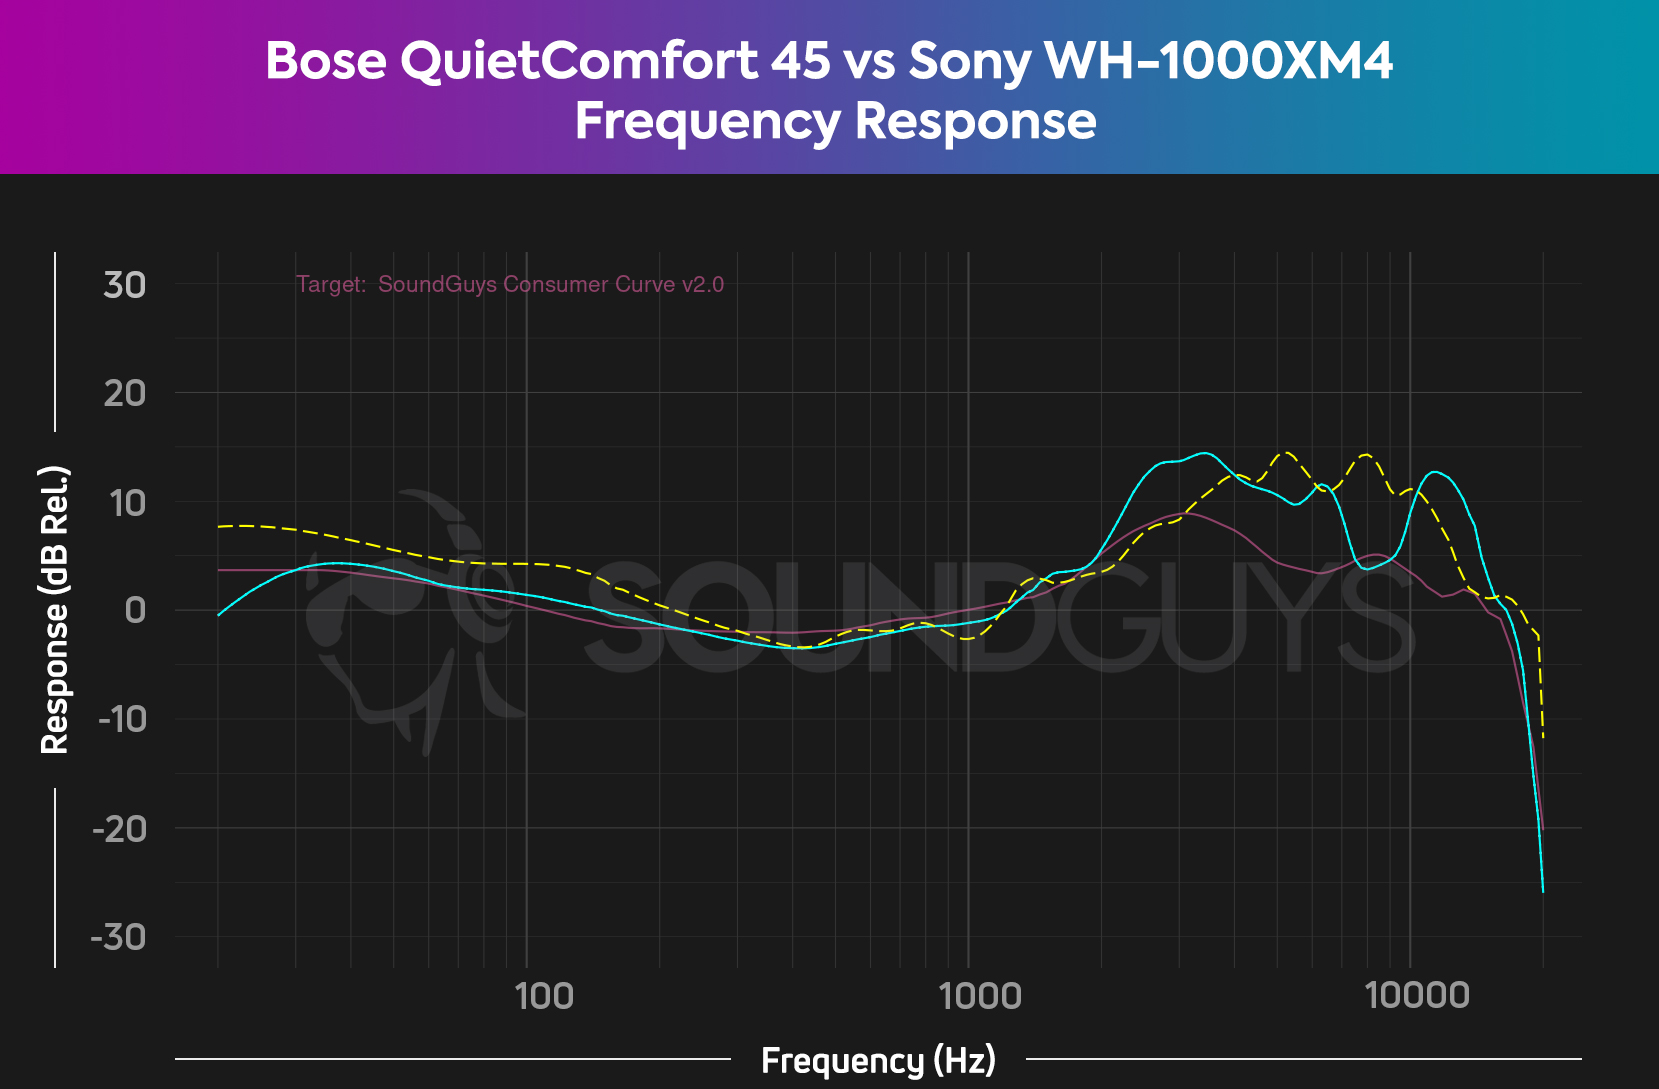 A frequency response comparison chart for the Bose QuietComfort 45 and Sony WH-1000XM4 bluetooth headphones, which shows more bass range emphasis from Sony and more high range from Bose.